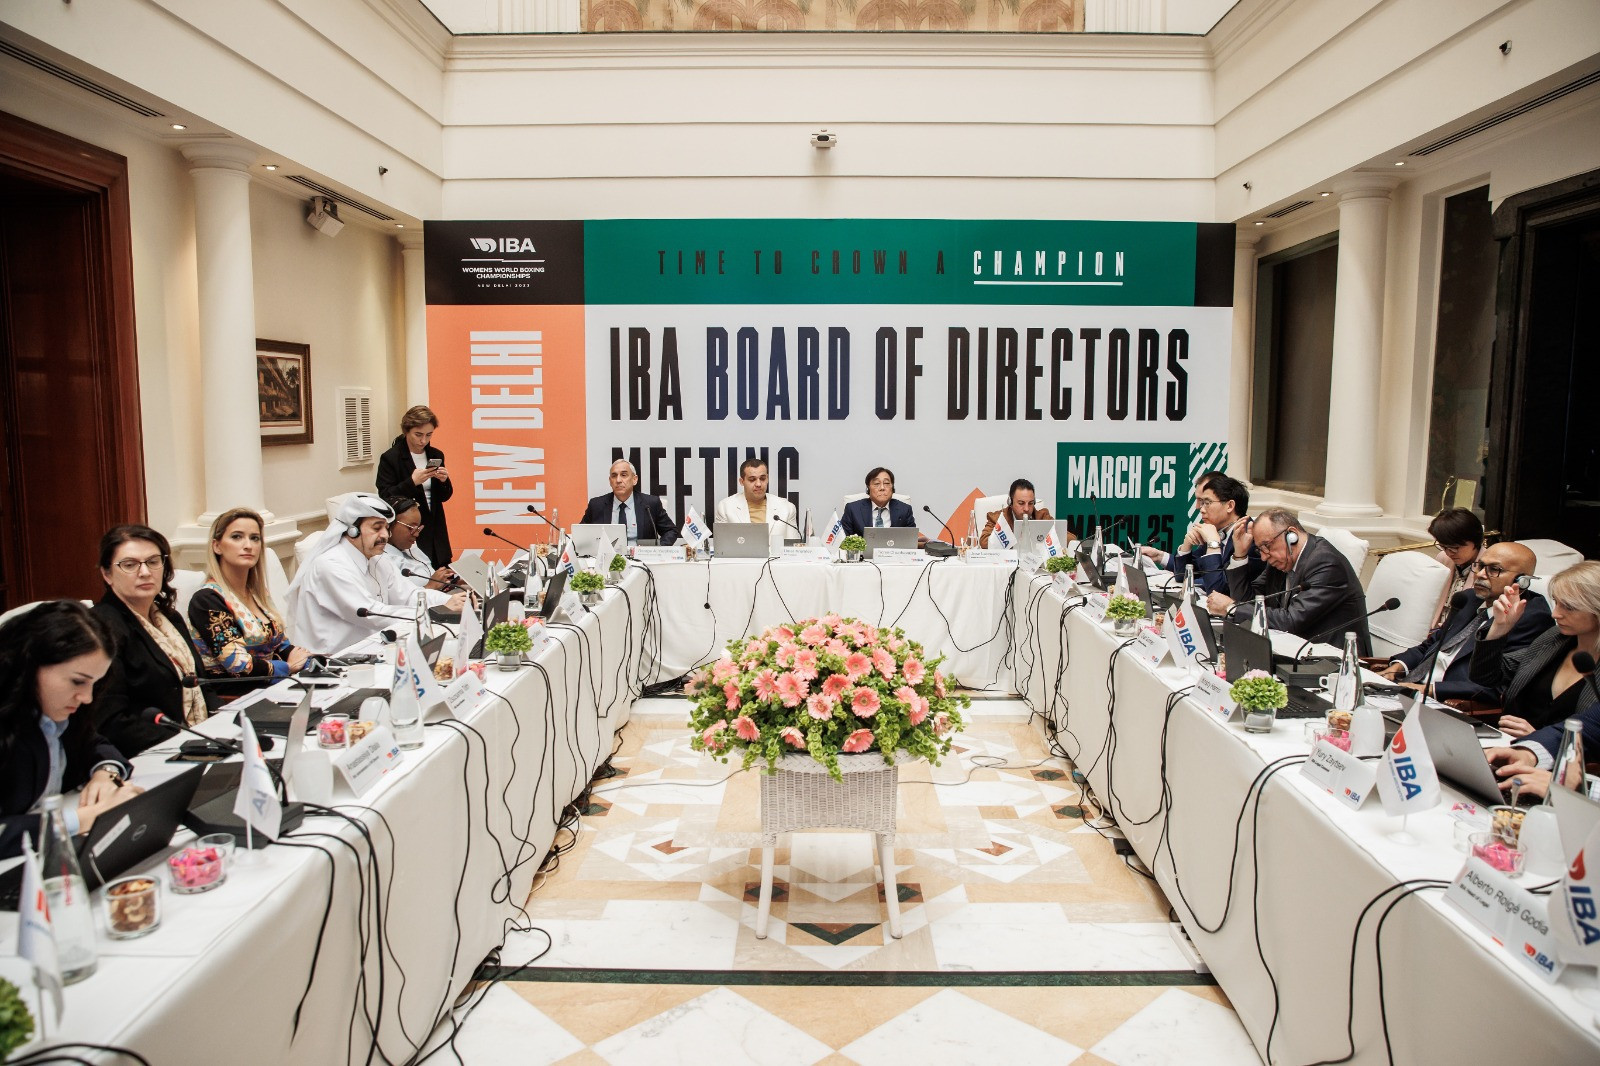 The IBA has submitted a 400-page report to the IOC to address the long-standing governance concerns raised against the governing body ©IBA